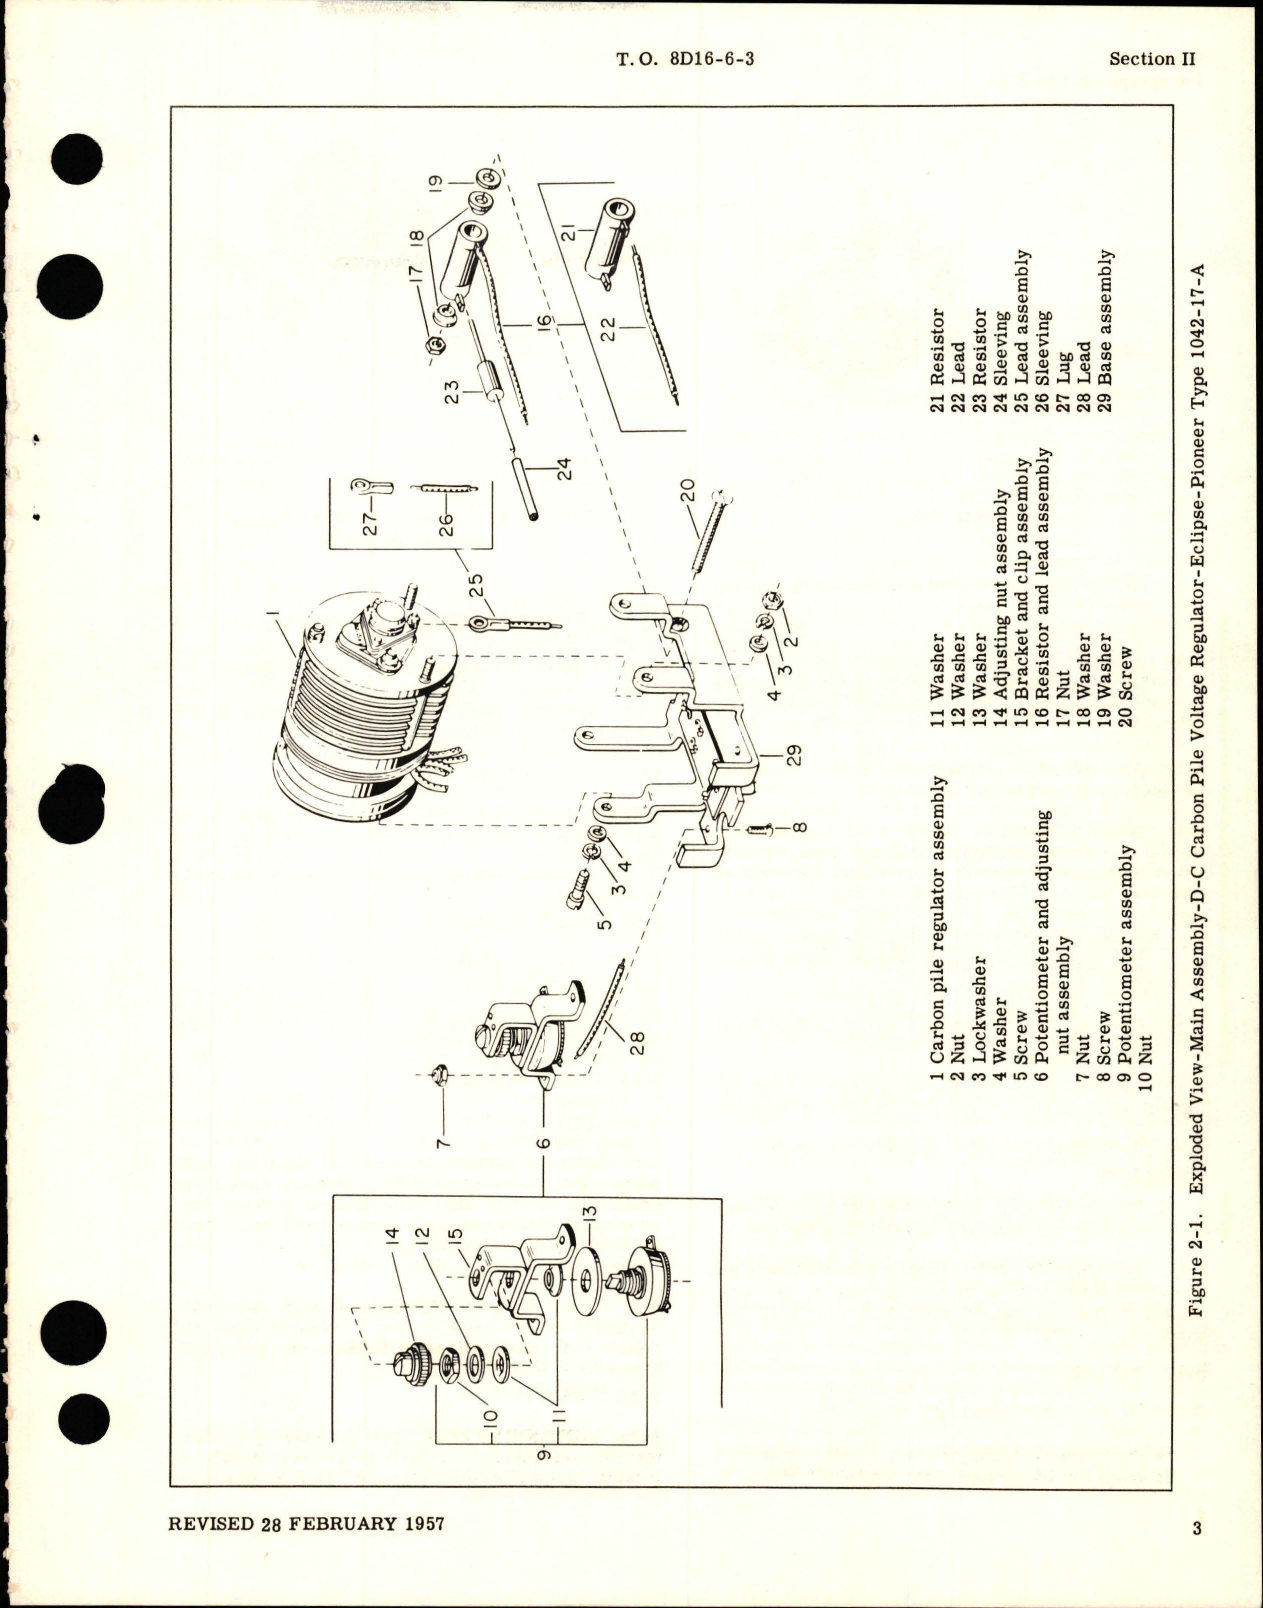 Sample page 7 from AirCorps Library document: Overhaul Instructions for D-C Carbon Pile Voltage Regulator - Type 1042-17-A